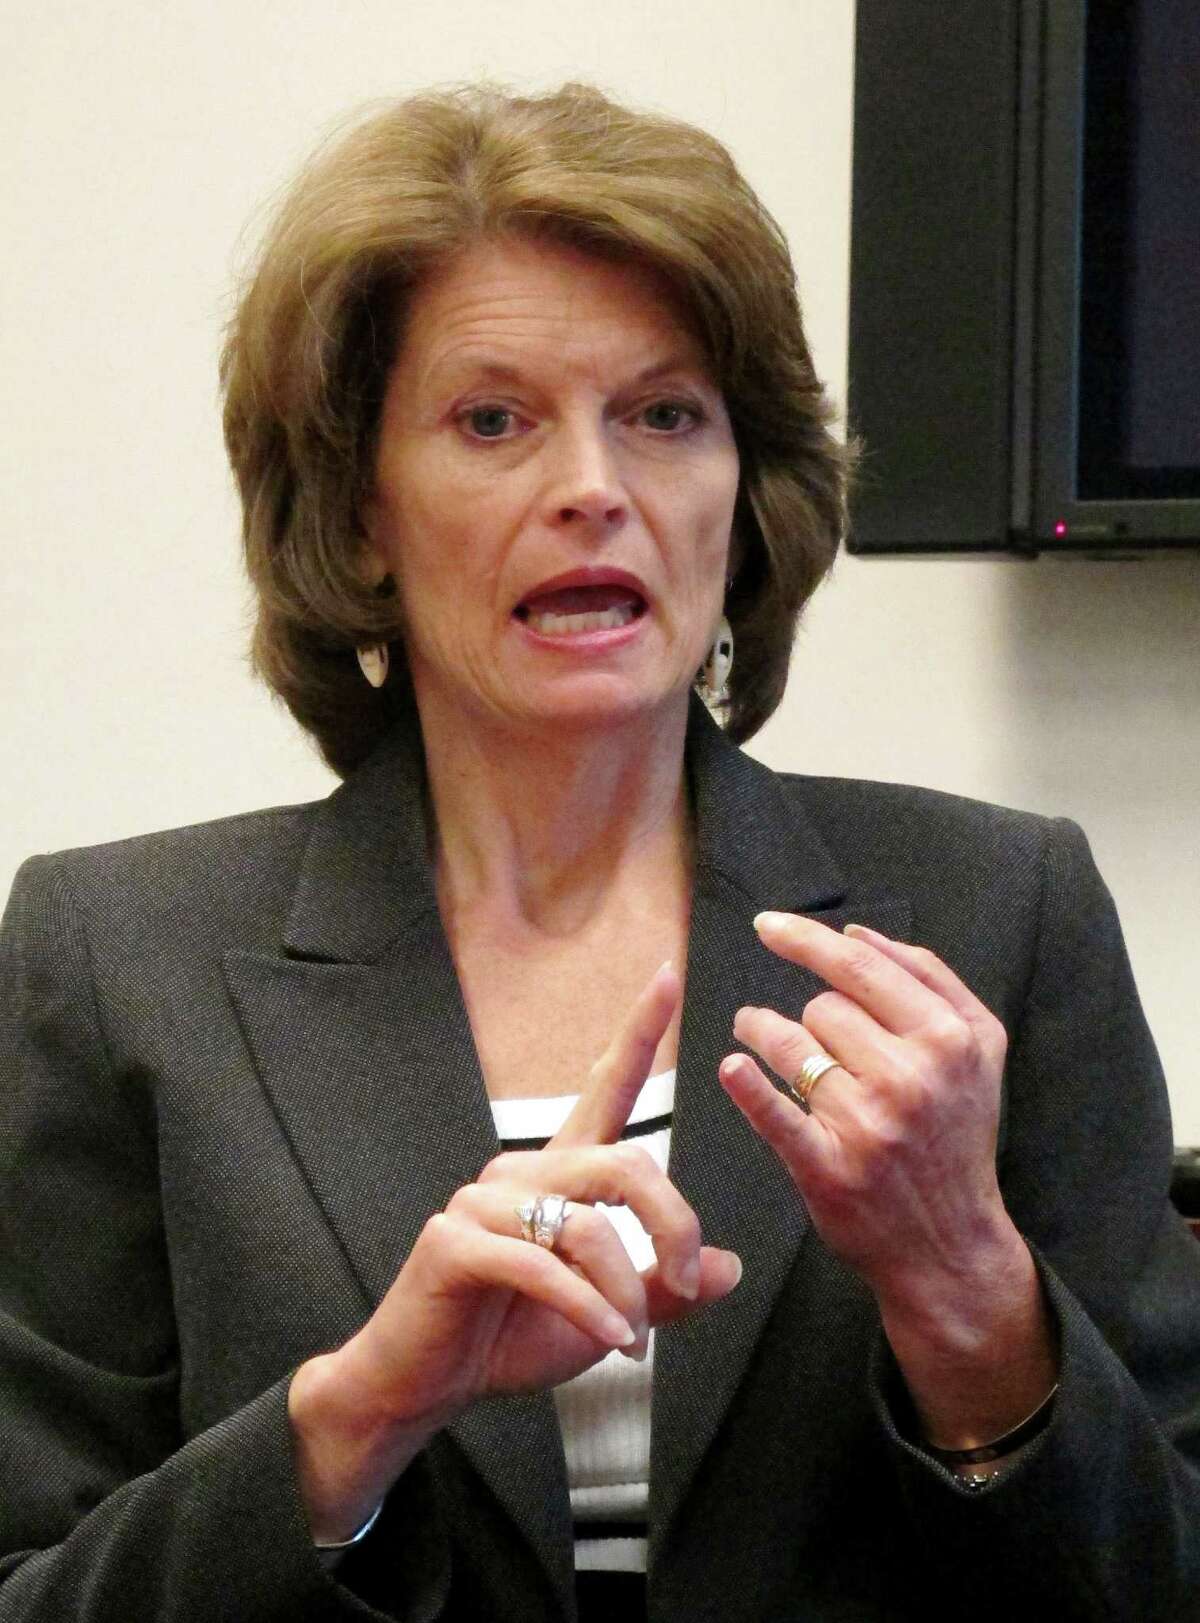 FILE - In this April 19, 2011 file photo, Sen. Lisa Murkowski, R-Alaska gestures during an interview in Anchorage, Alaska. Is the 2012 election shaping up to be all about women? Democrats are accusing the GOP of a âwar against womenâ after the Republicans reignited a national debate over cultural issues, including birth control. President Barack Obama says the Democrats have the best story to tell female voters. But Republicans _ including Ann Romney and Alaska Sen. Lisa Murkowski _ say their party will win by focusing on women's top issue: the economy. (AP Photo/Mark Thiessen, File)